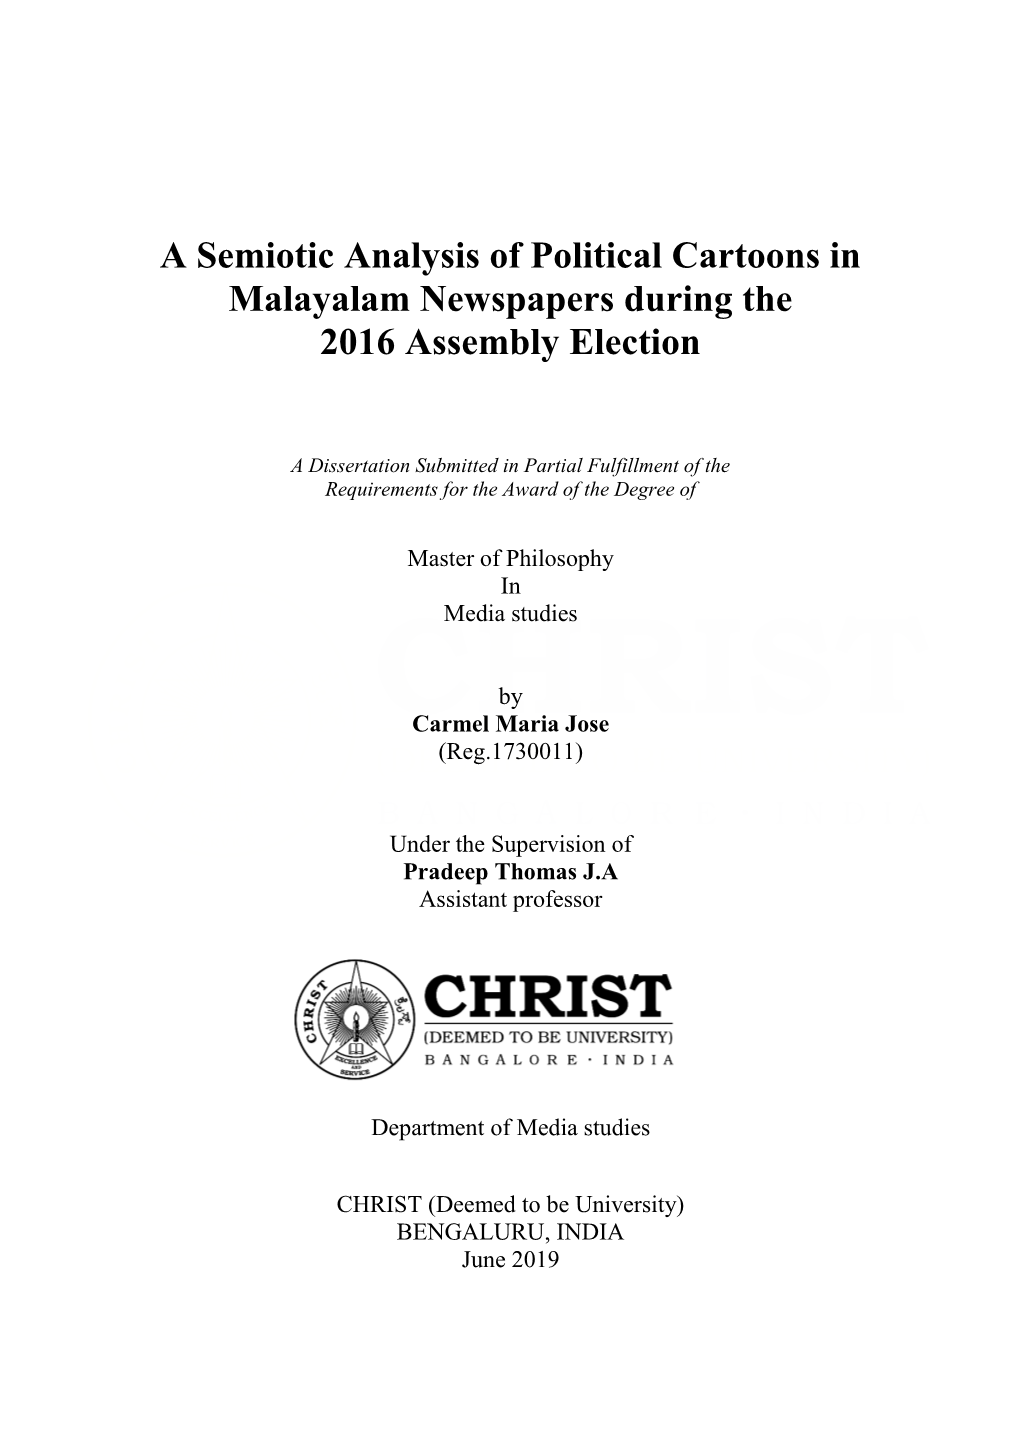 A Semiotic Analysis of Political Cartoons in Malayalam Newspapers During the 2016 Assembly Election